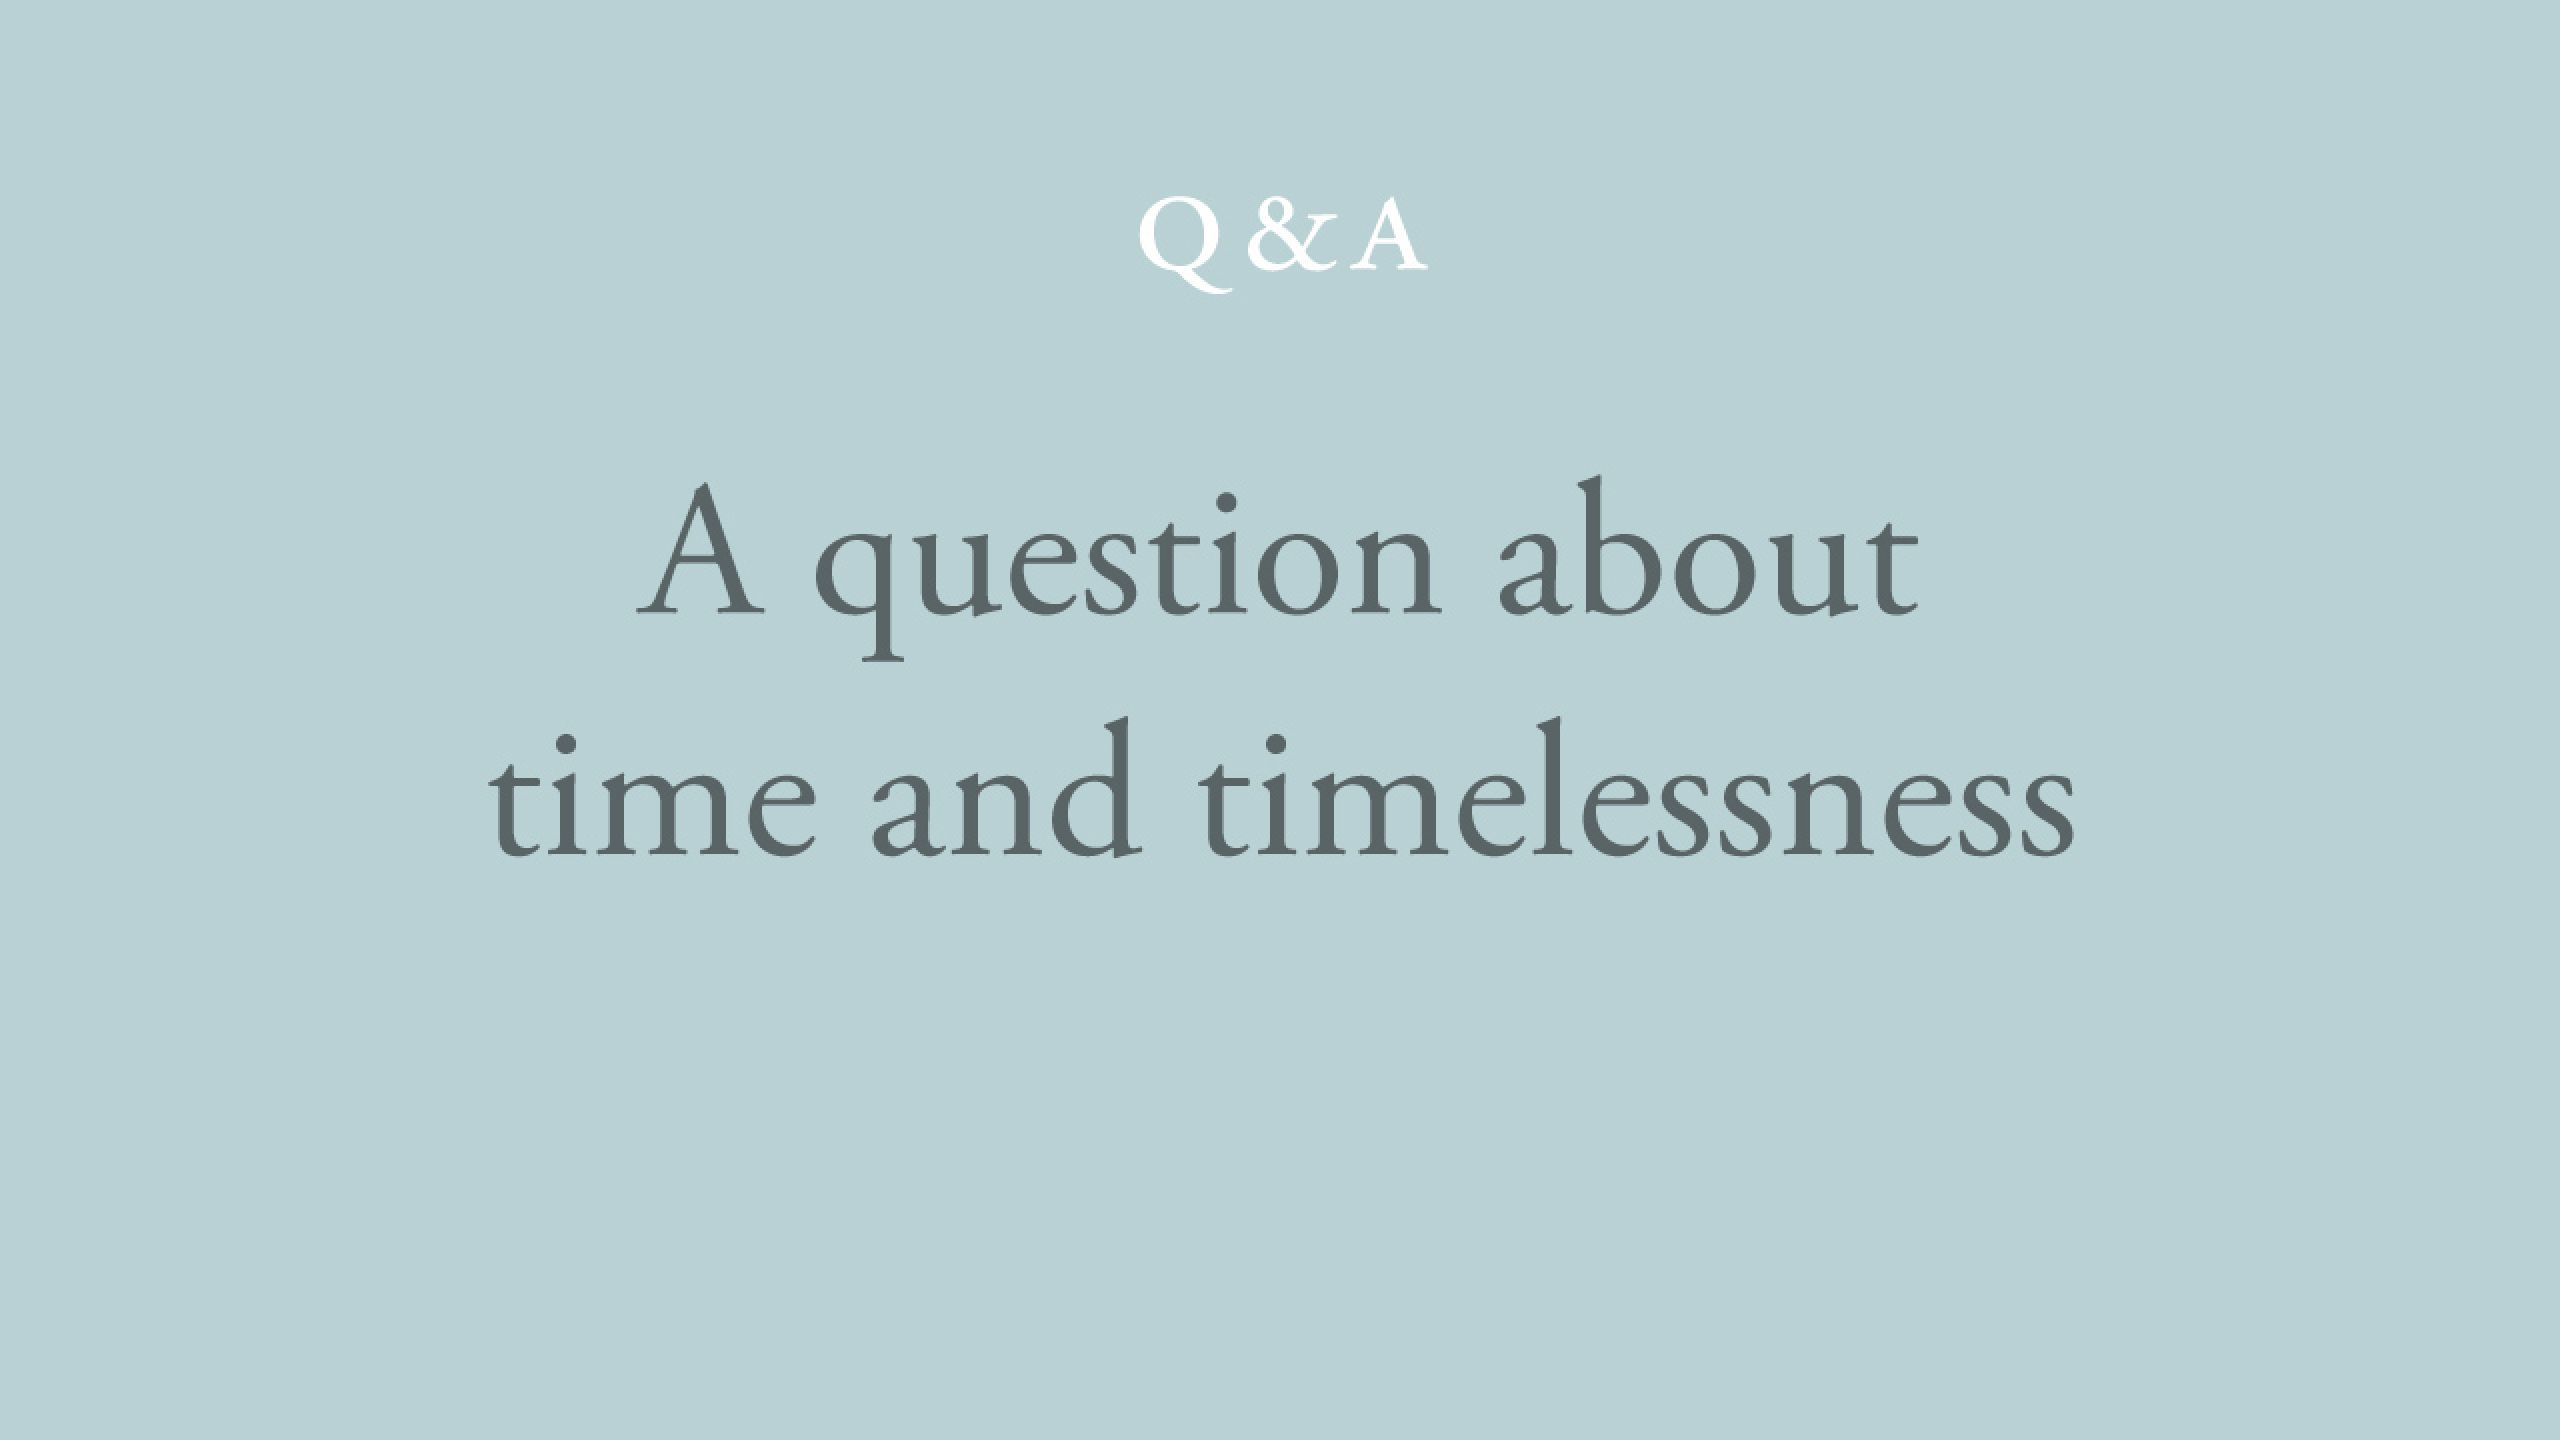 How is it possible to experience both time and timelessness? 